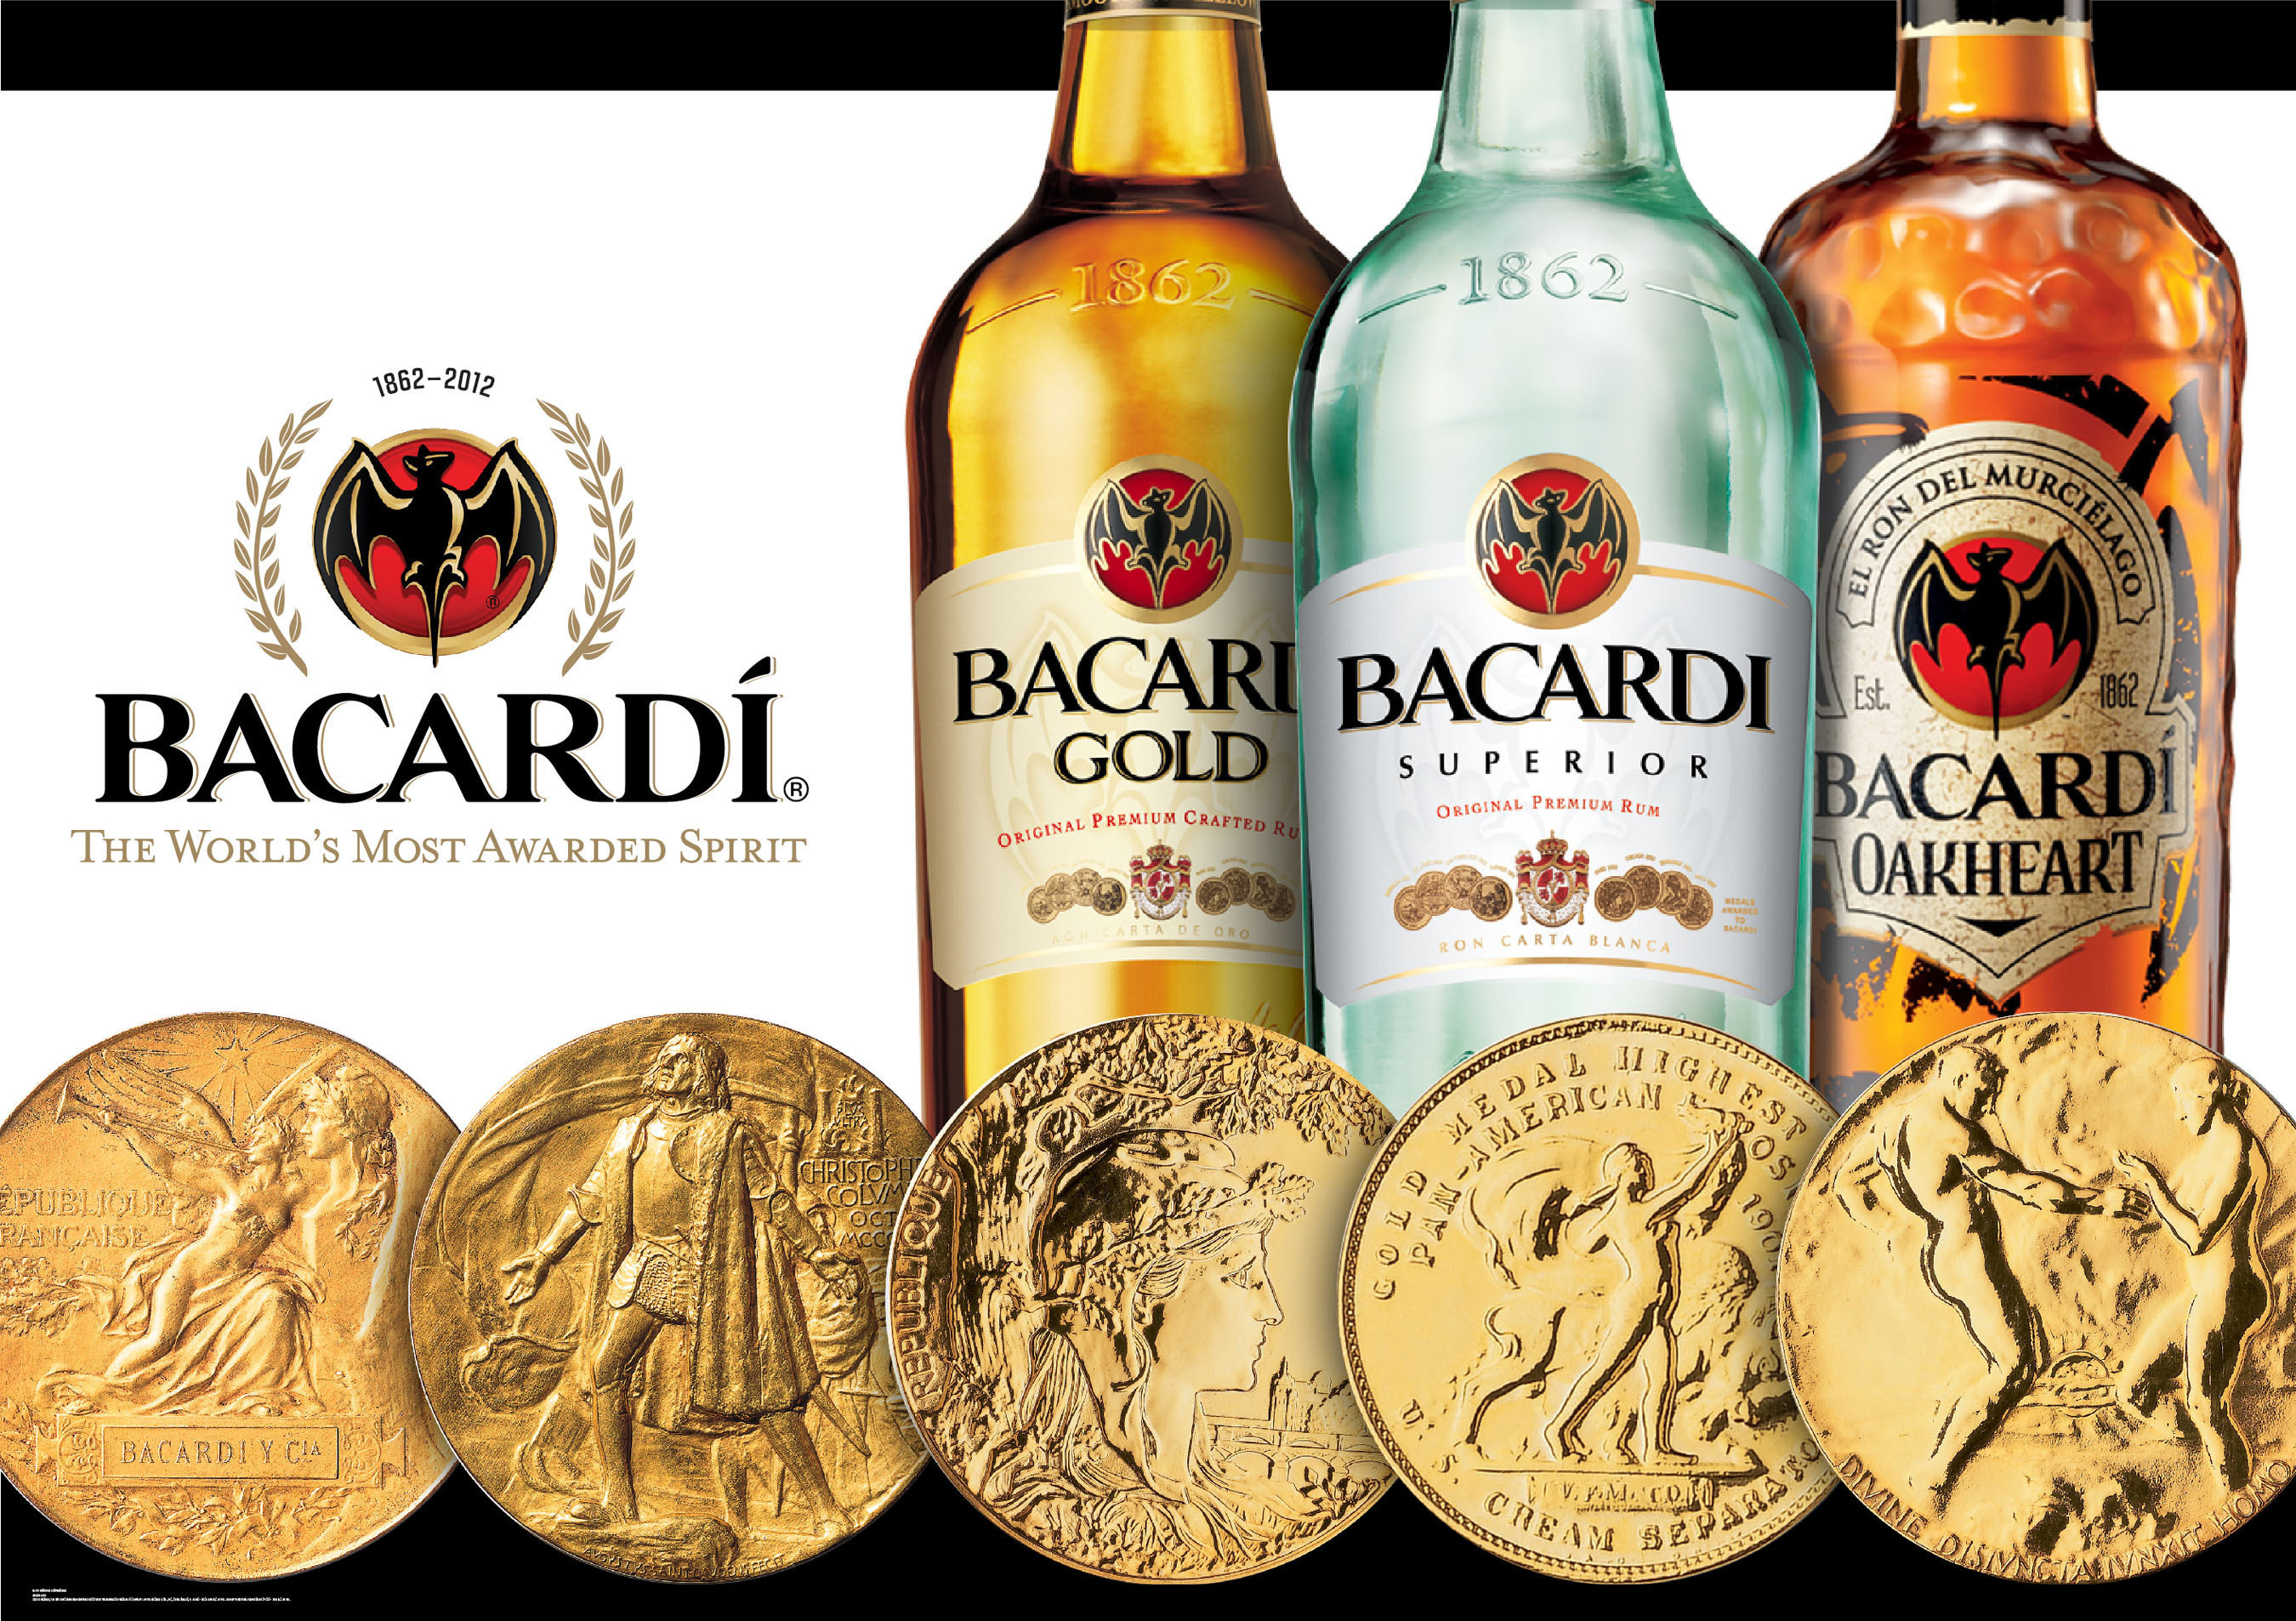 BACARDI Rum--The World\'s Awarded Accolade Taste Most For Spirit--Celebrates And Quality Superior Top